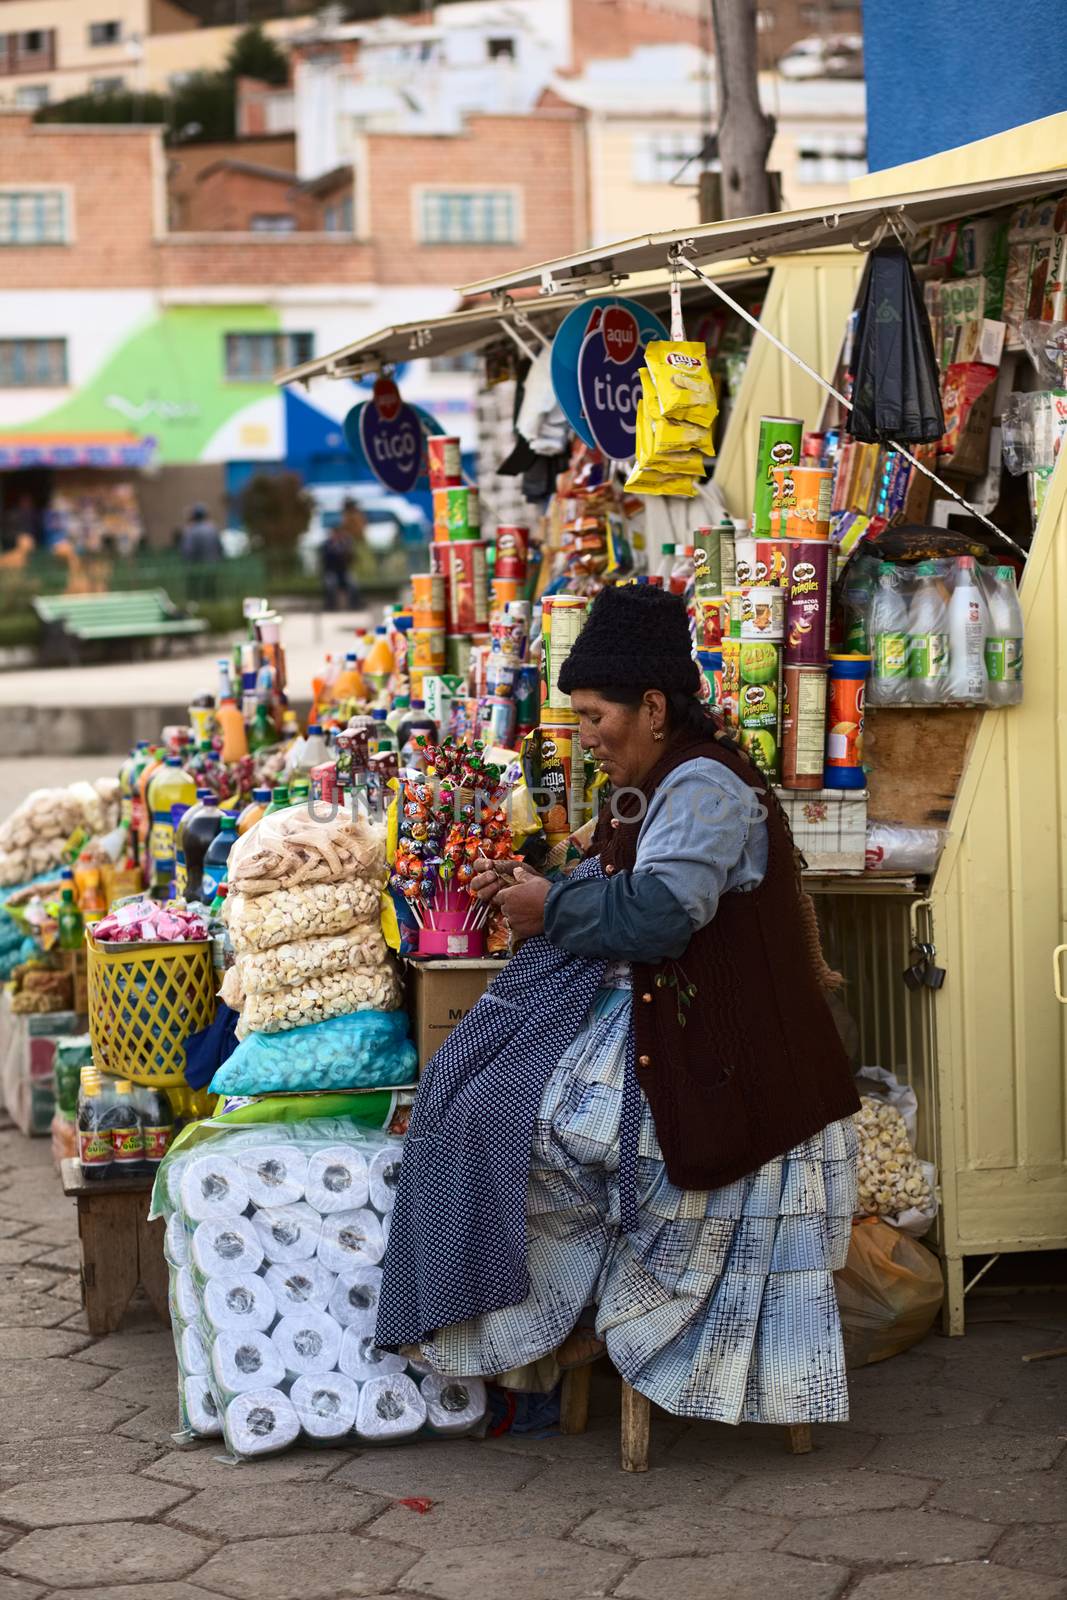 TIQUINA, BOLIVIA - OCTOBER 16, 2014: Unidentified woman sitting at a snack stand and doing crochet at the main square on October 16, 2014 in San Pedro de Tiquina, Bolivia